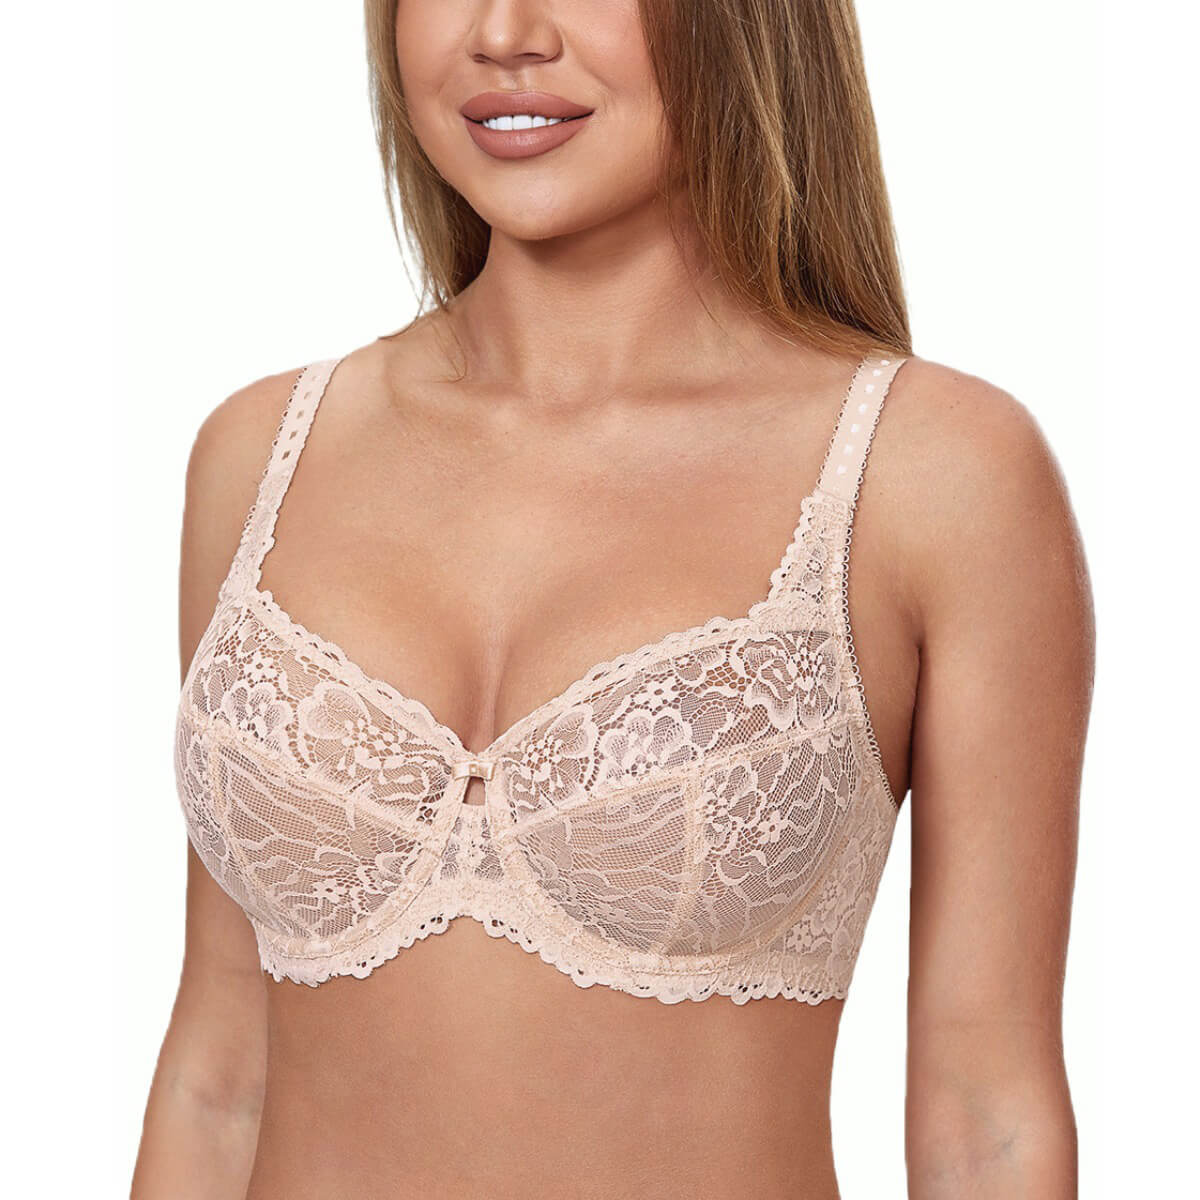 38E Cuup Bra Red Unlined Sheer The Balconette 38DD Underwire